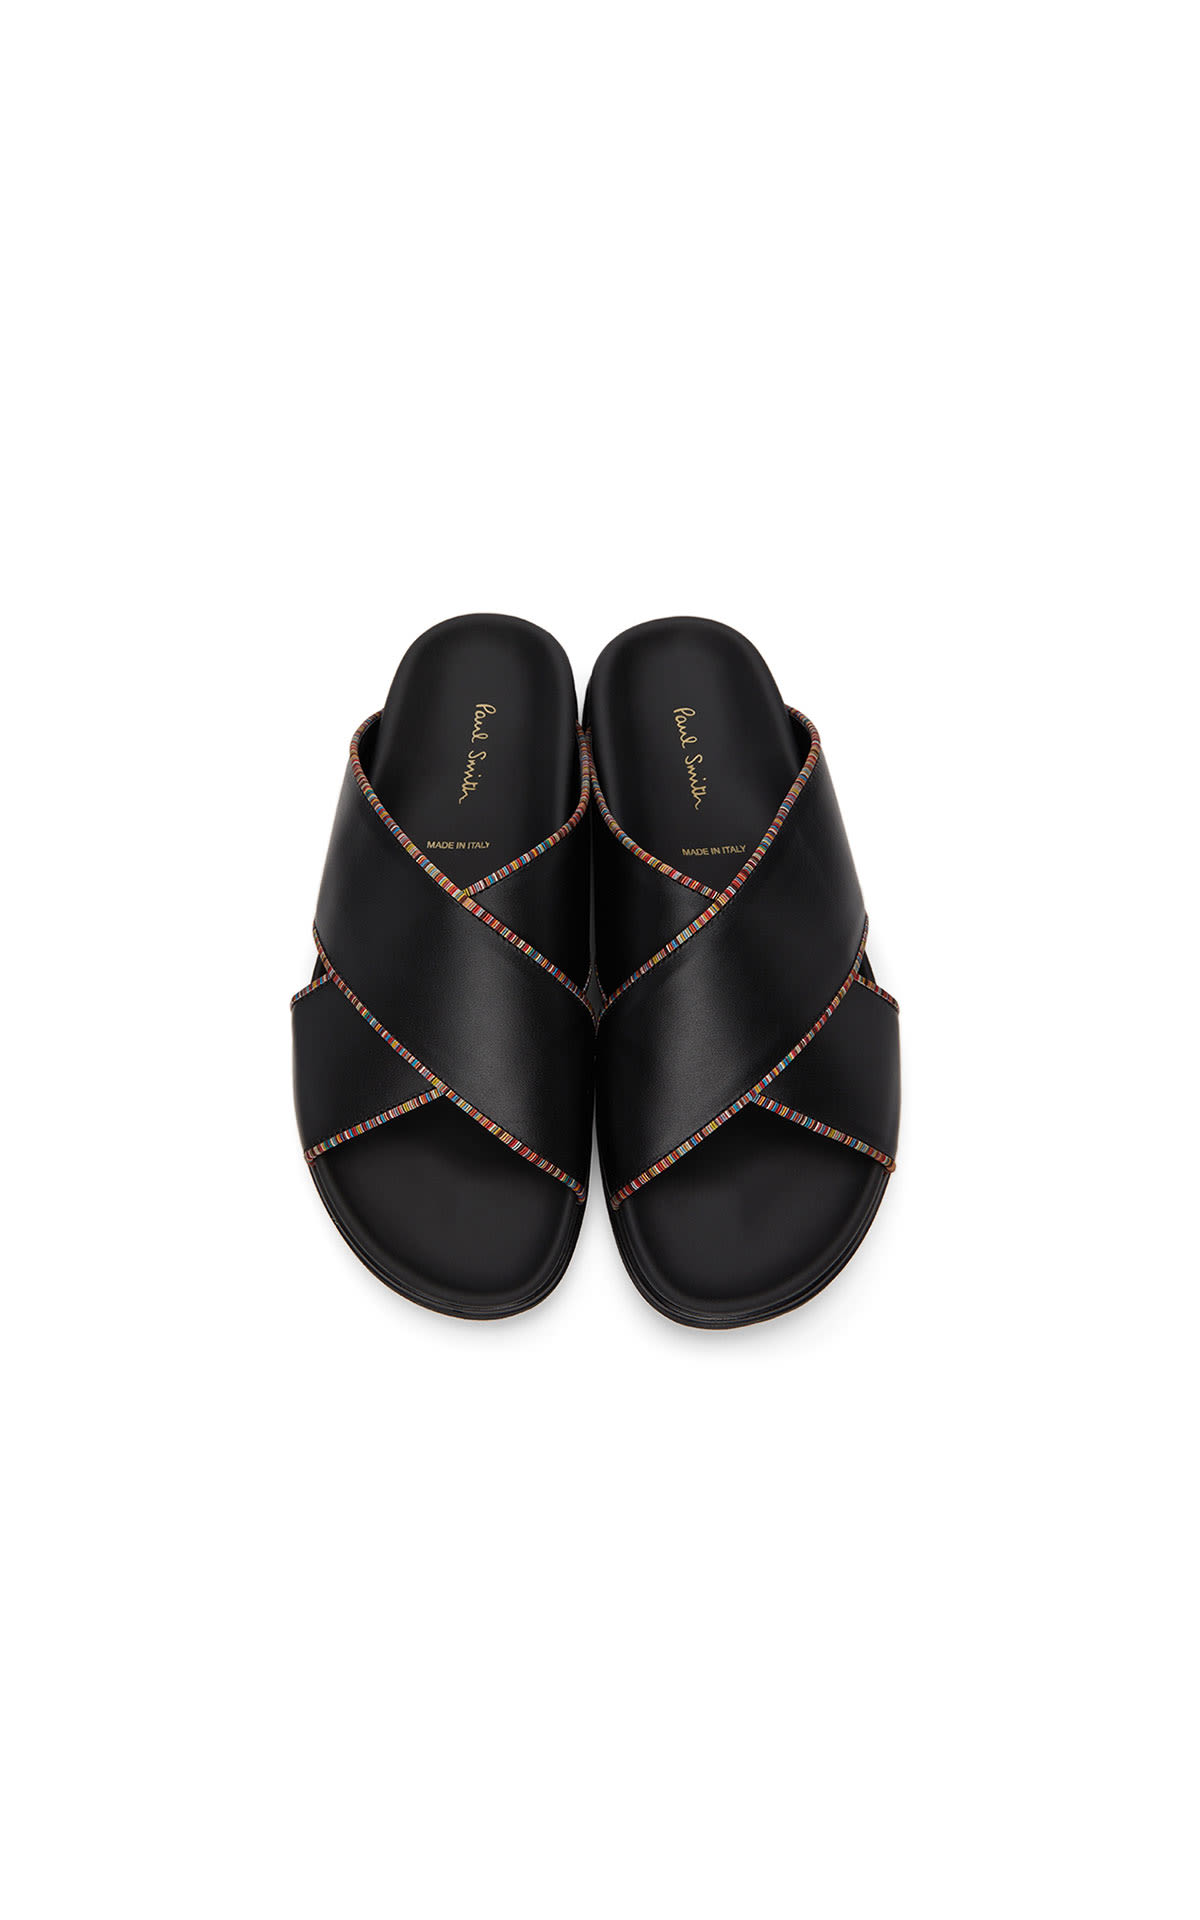 Paul Smith Leather slip-on sandals from Bicester Village